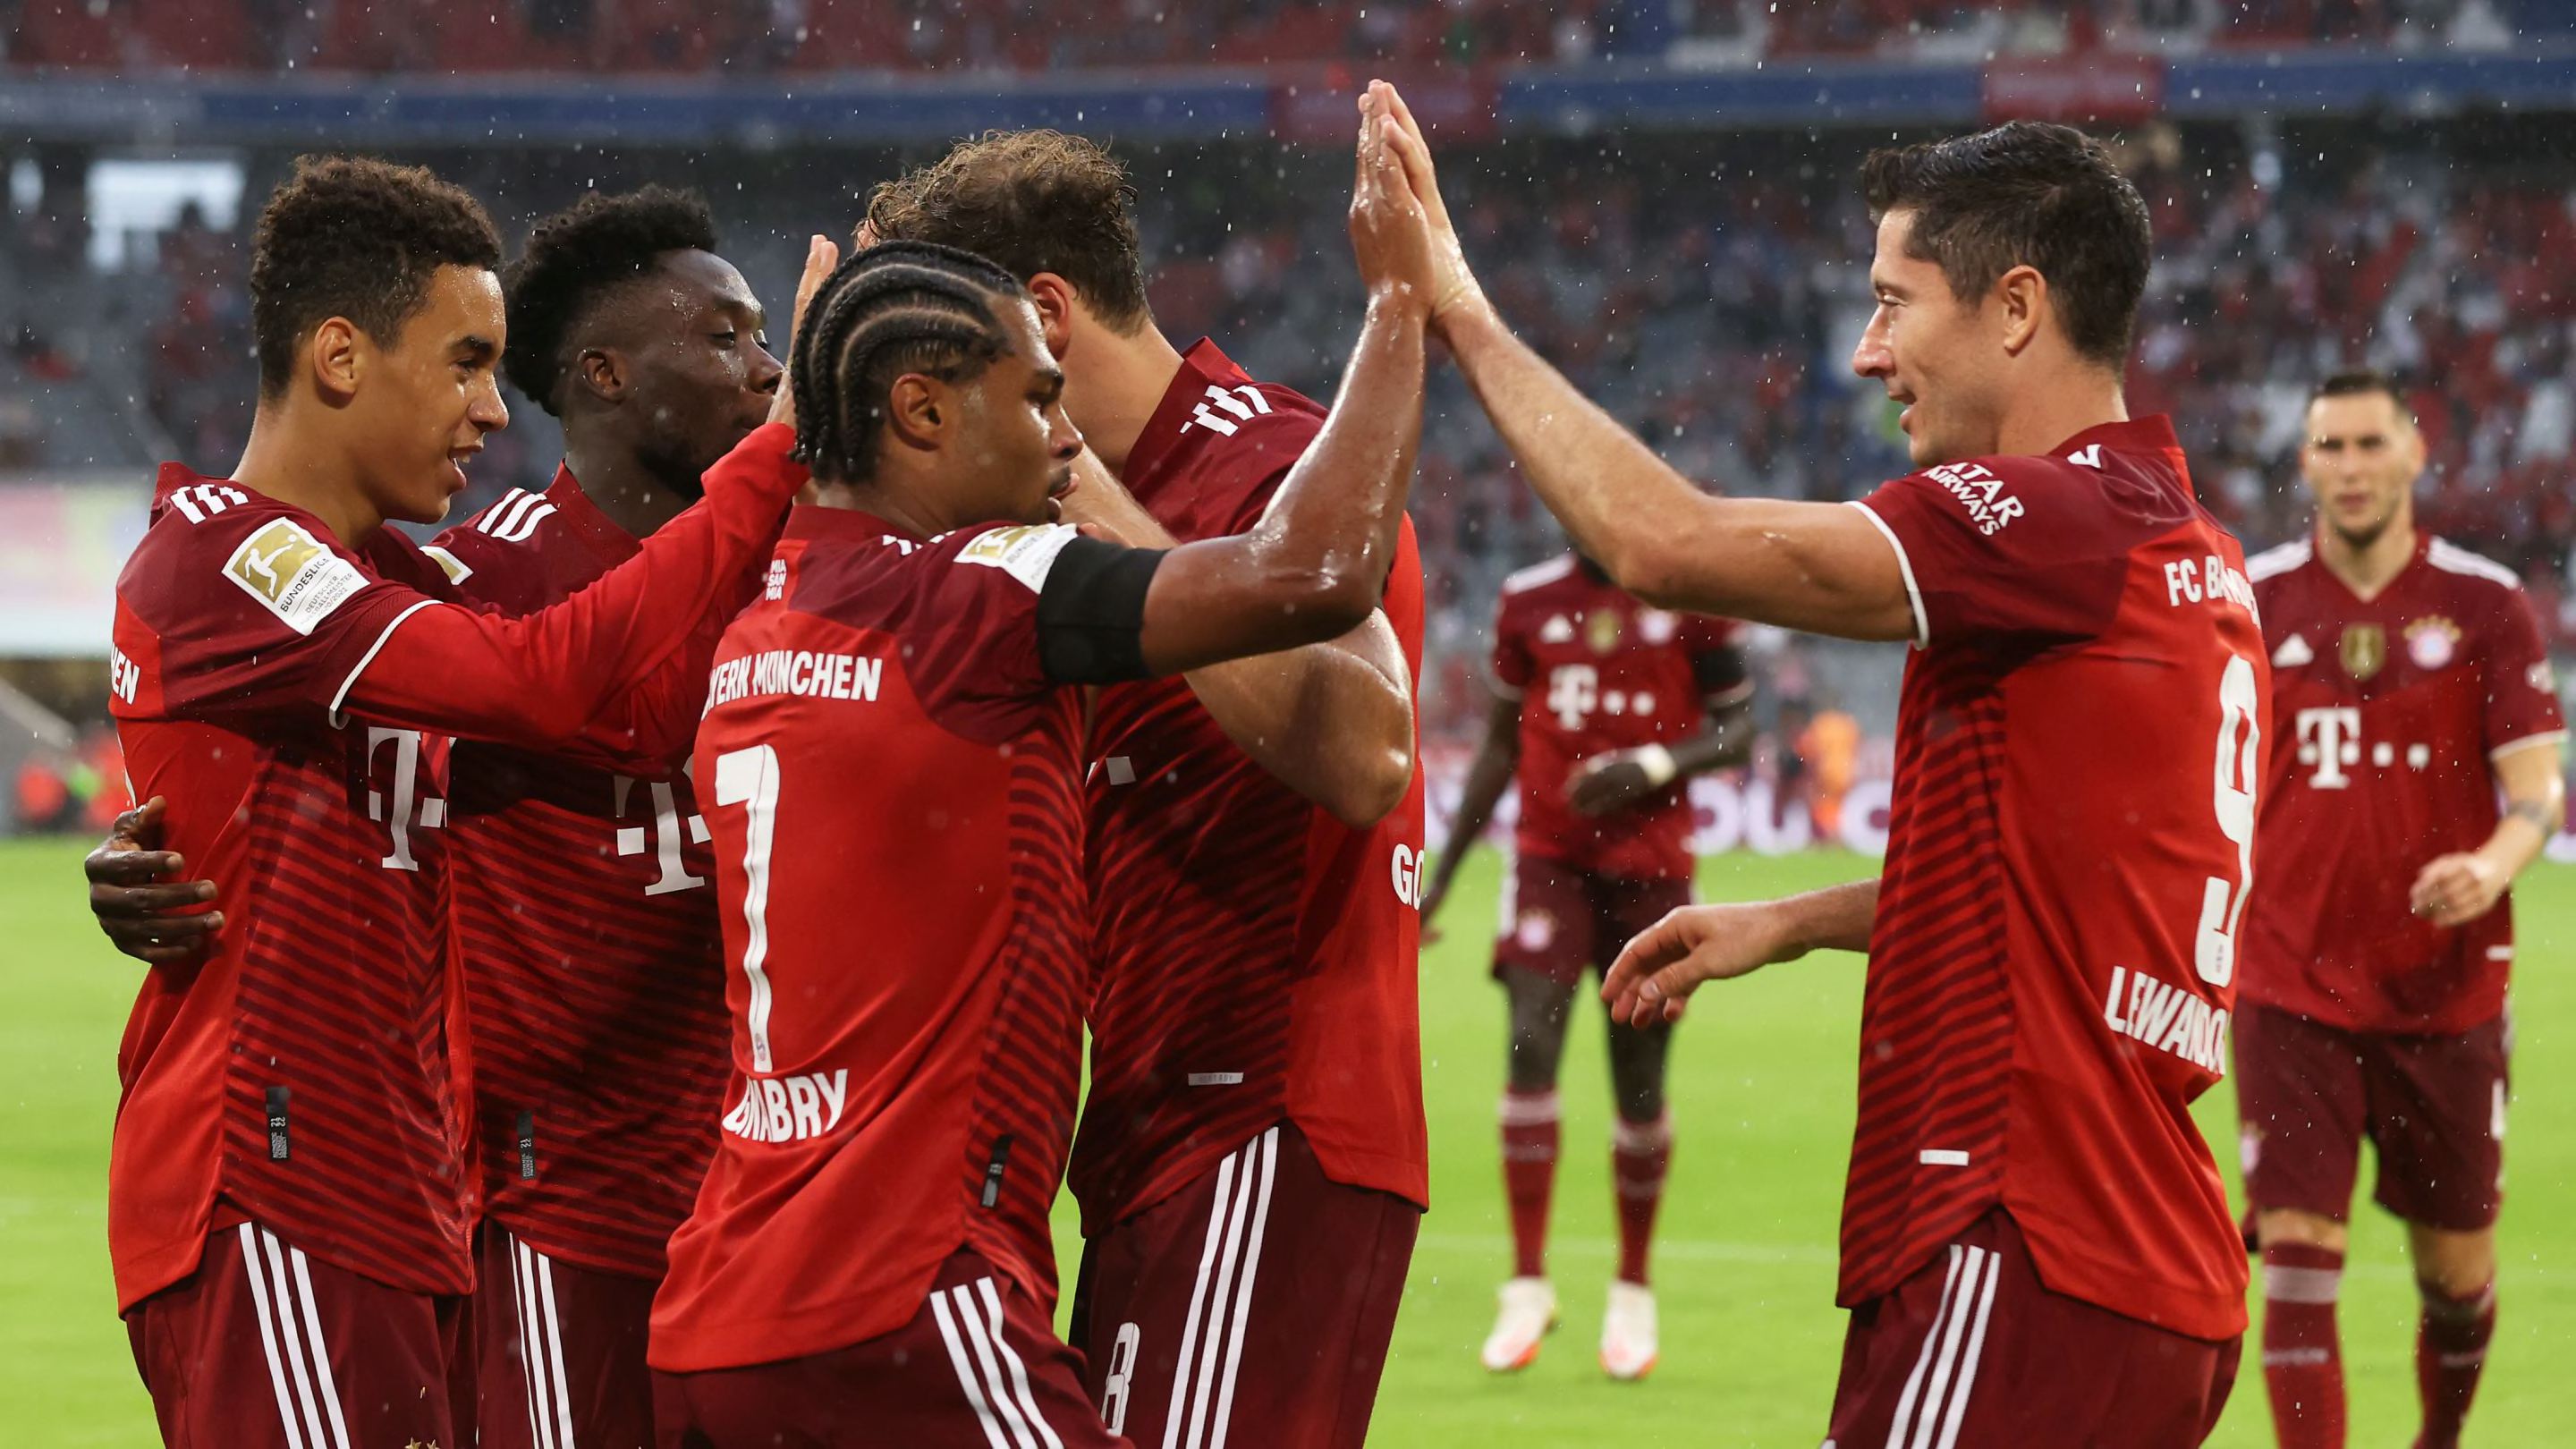 Bayern Munich 3 2 Koln Player Ratings As Serge Gnabry Scores Twice In Tight Win Espldaily Football And More